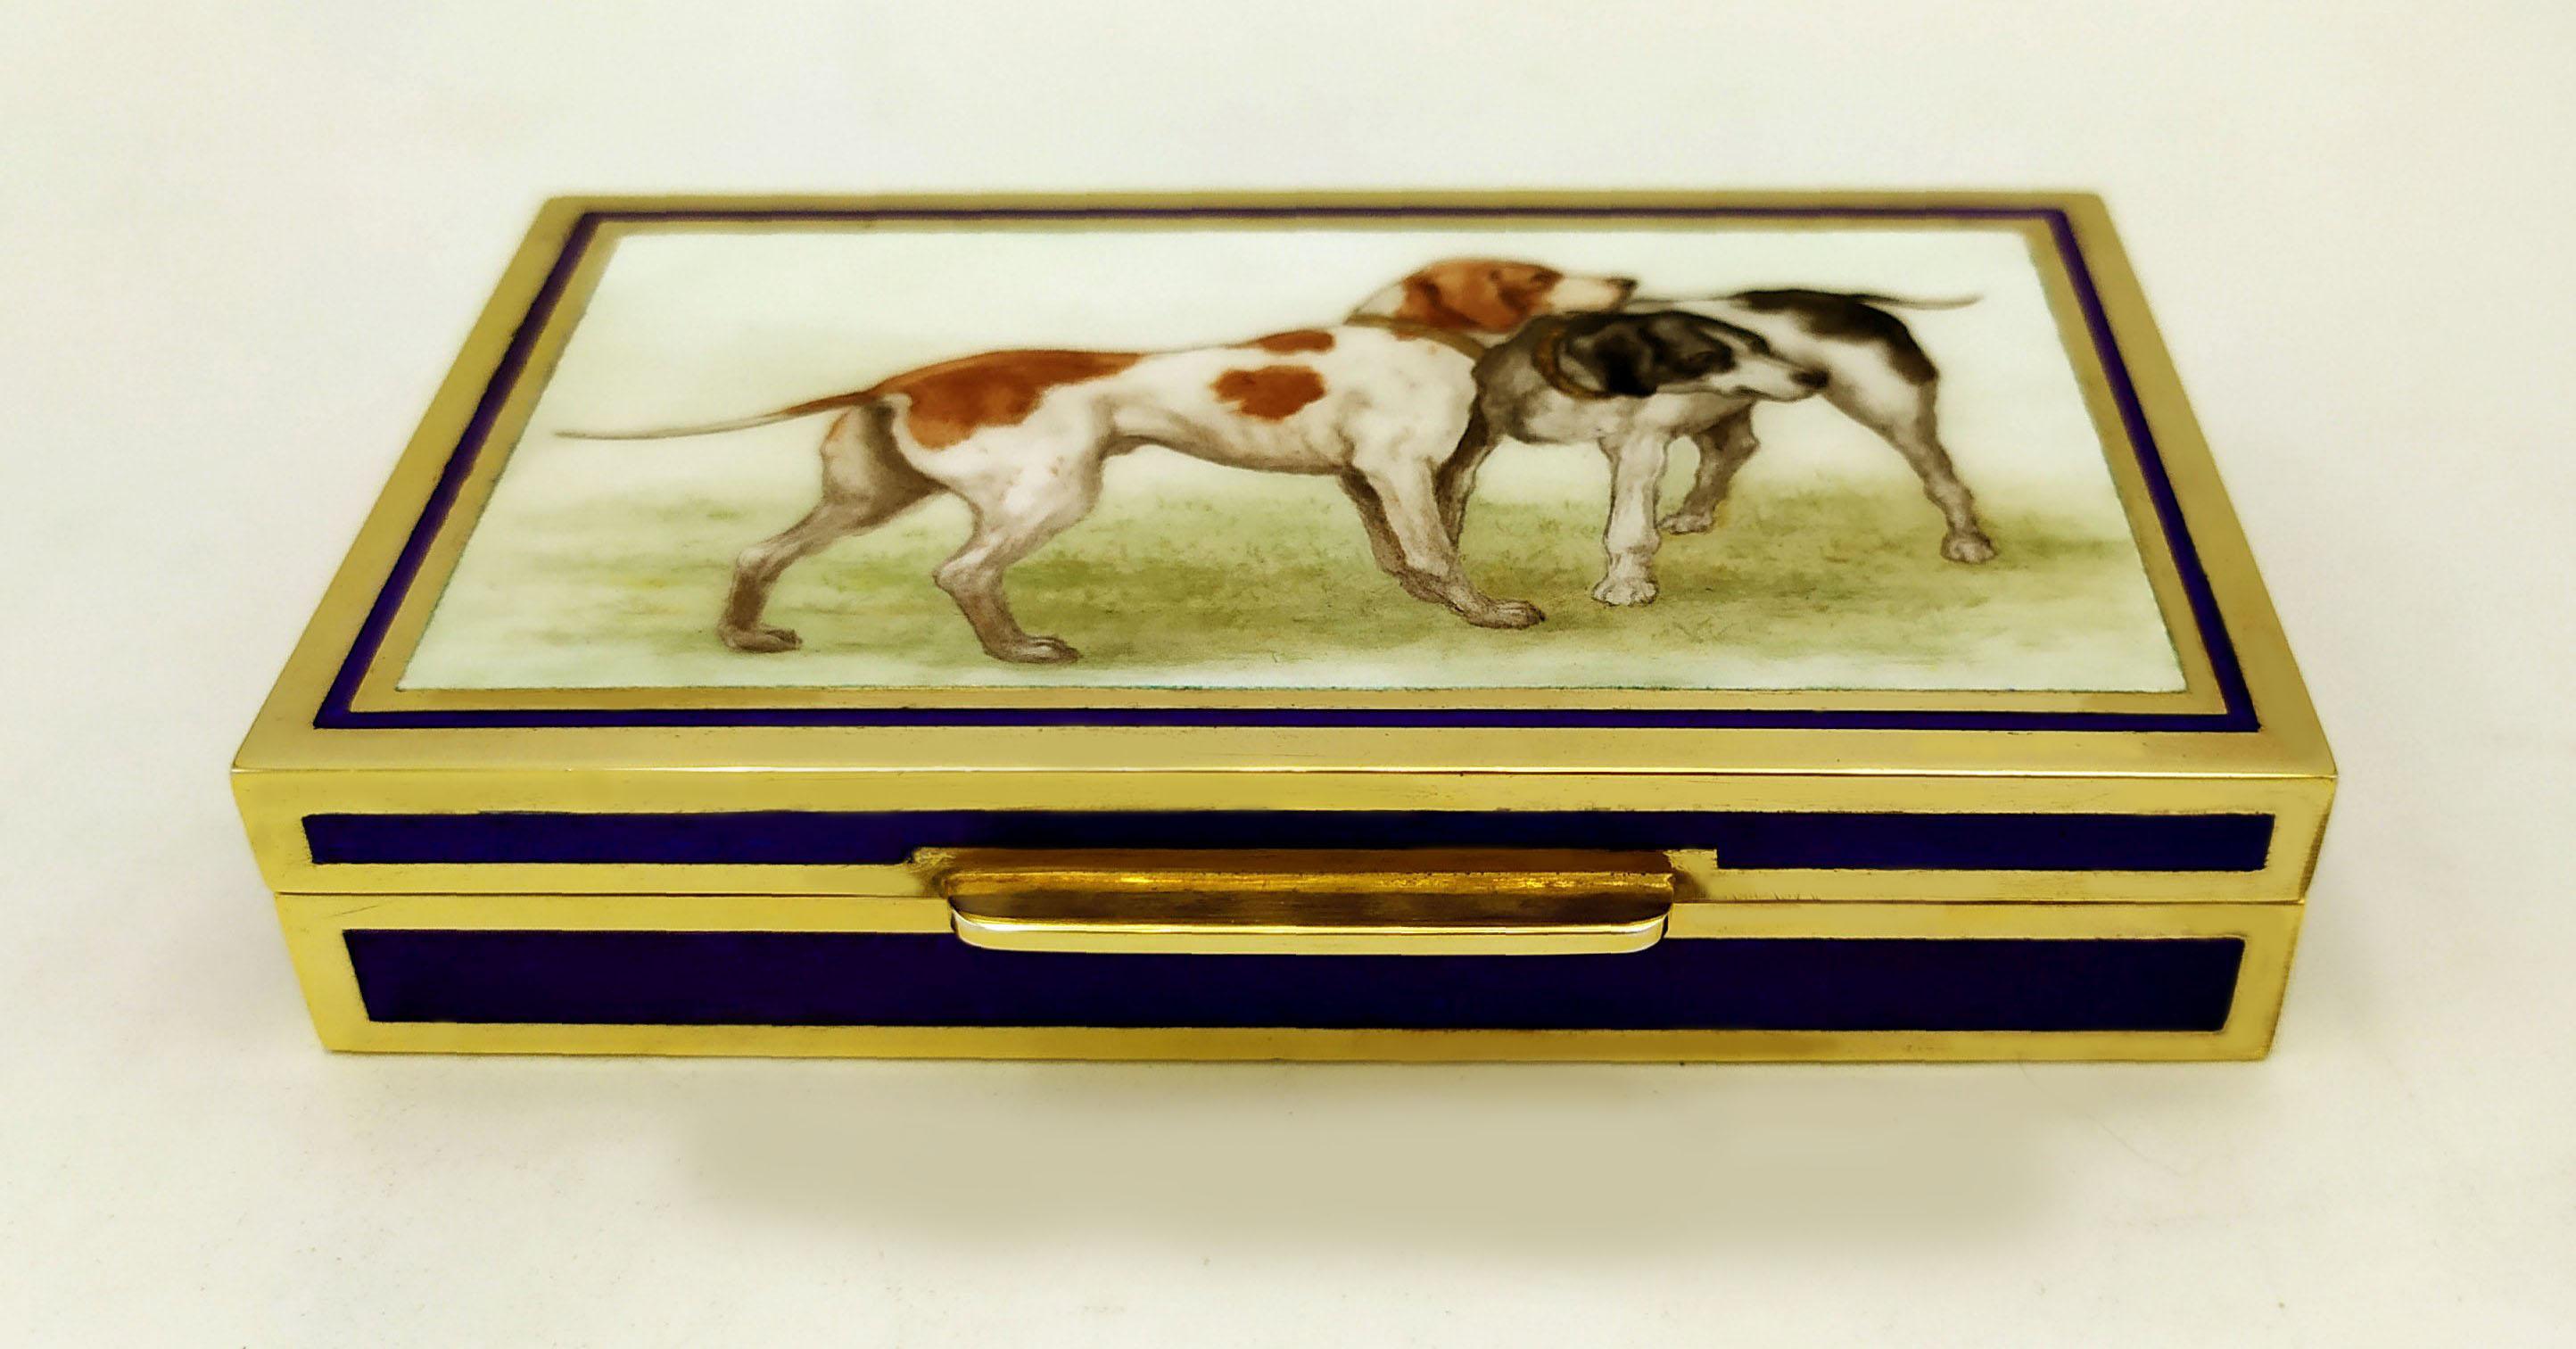 Rectangular table cigarette box in 925/1000 sterling silver gold plated with translucent fired enamels on guillochè and fine miniature hand painted by the painter Renato Dainelli depicting two hunting dogs. Early 1900s English Art Nouveau style.